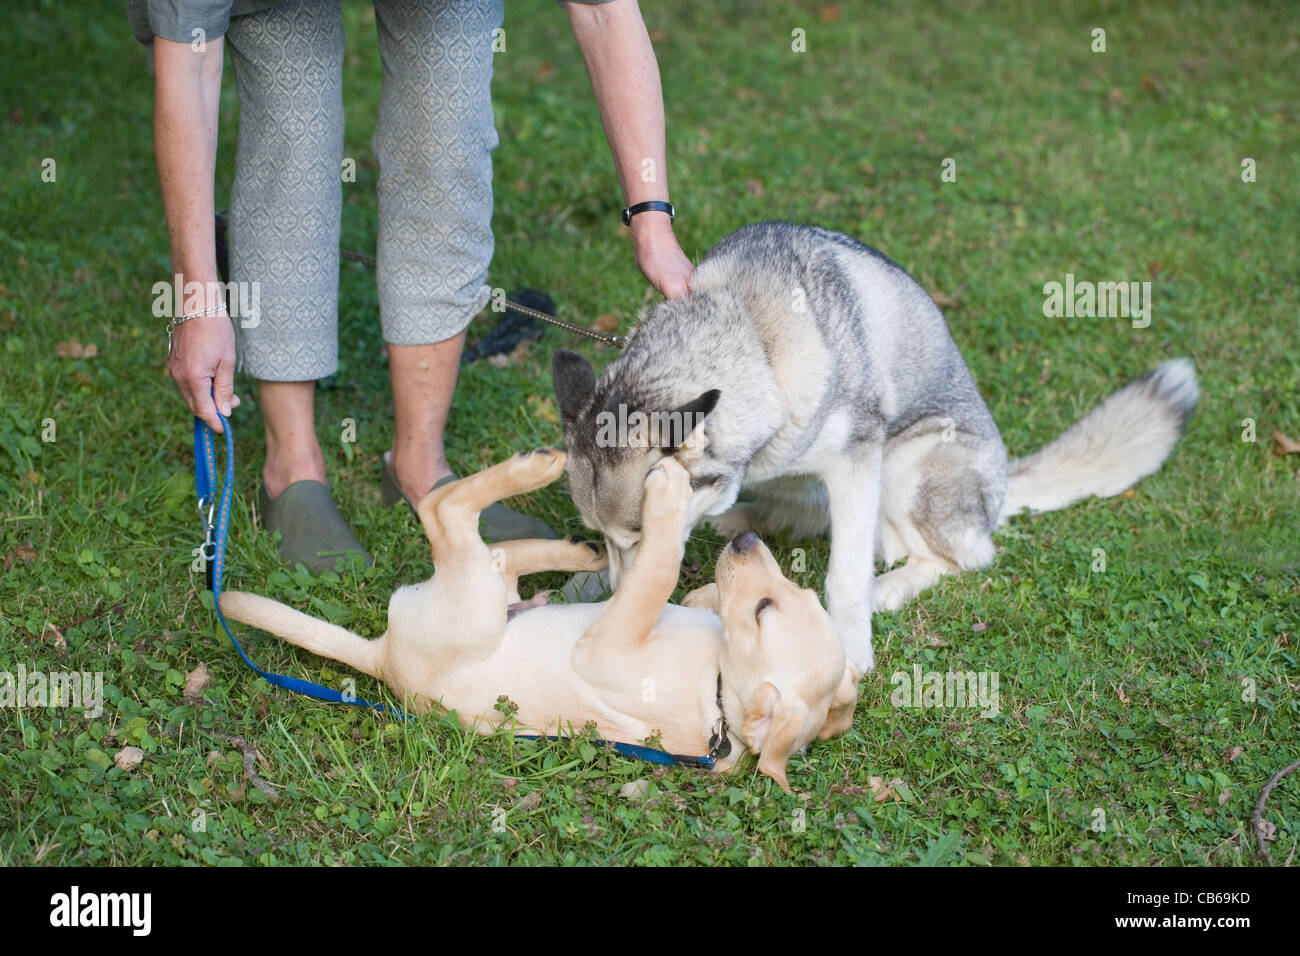 Owner introducing Ten week old Yellow Labrador Puppy to an adult Siberian Husky. Puppy showing subervience behaviour. Stock Photo